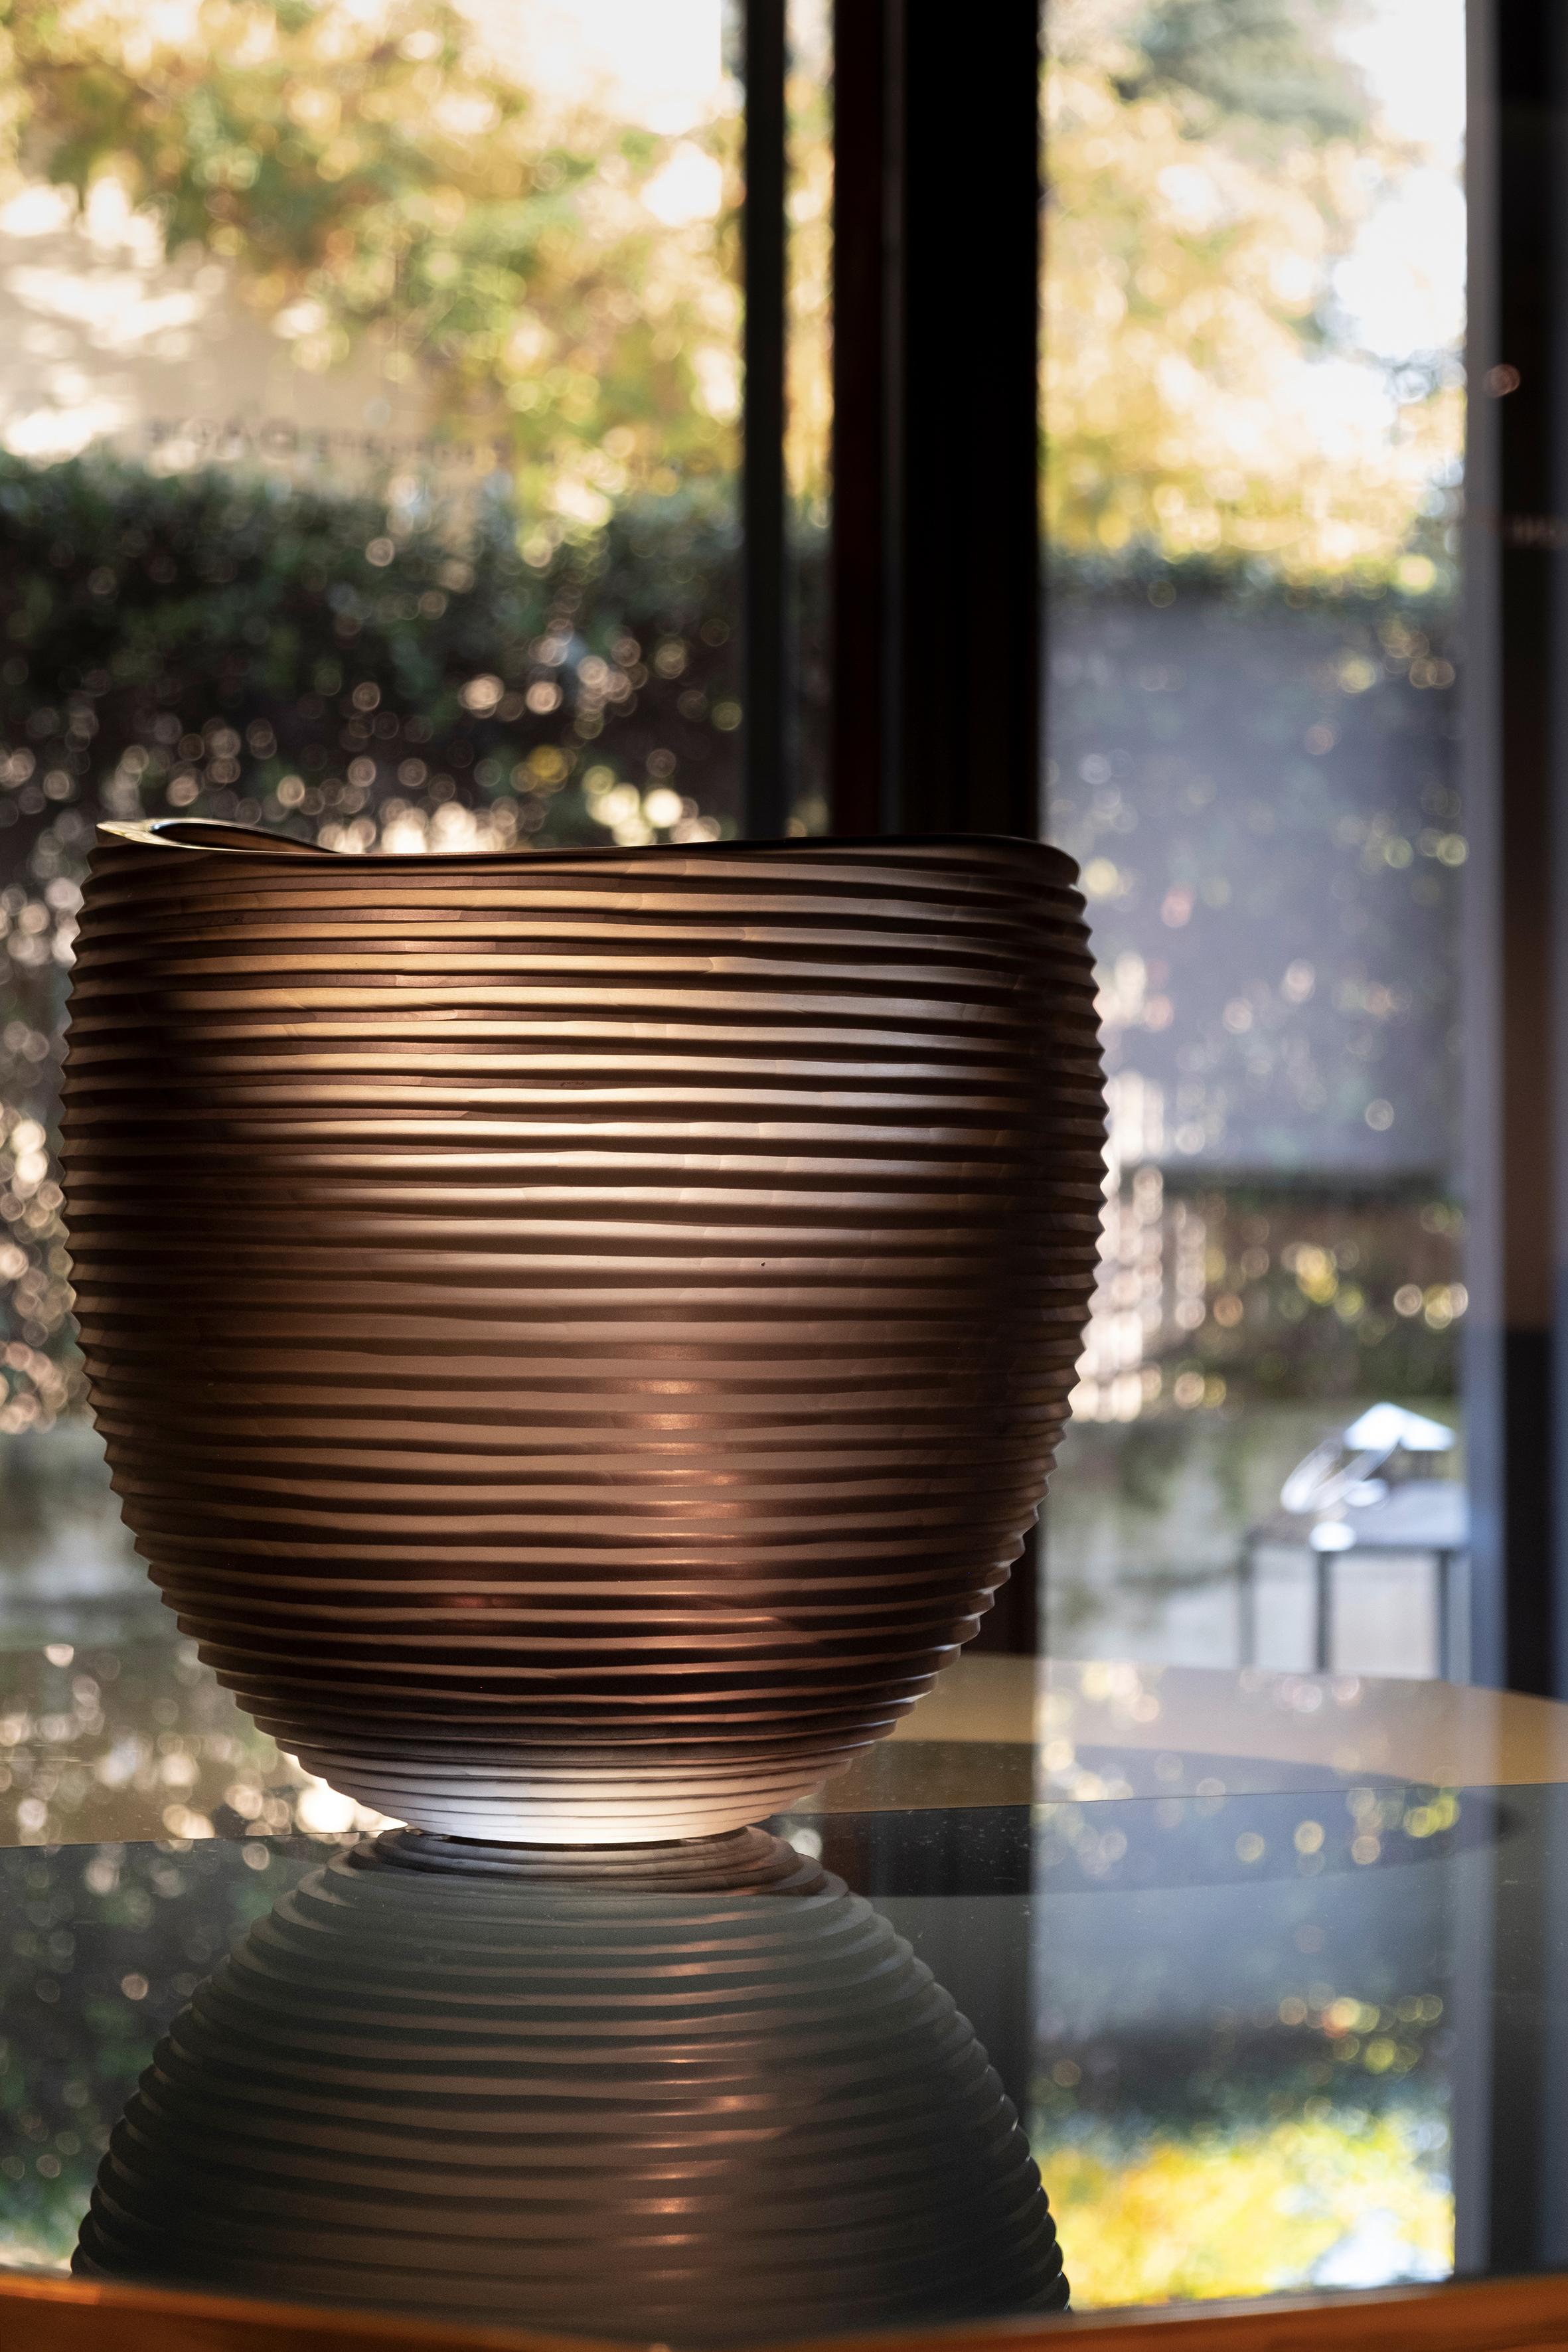 Linae large vase, Murano glass, by Federico Peri, 21st century.
The Linae vases — circular pots with a blunt rim are made in solid colour and thick blown Murano glass — are available in three different shapes and different finishes / incisions on